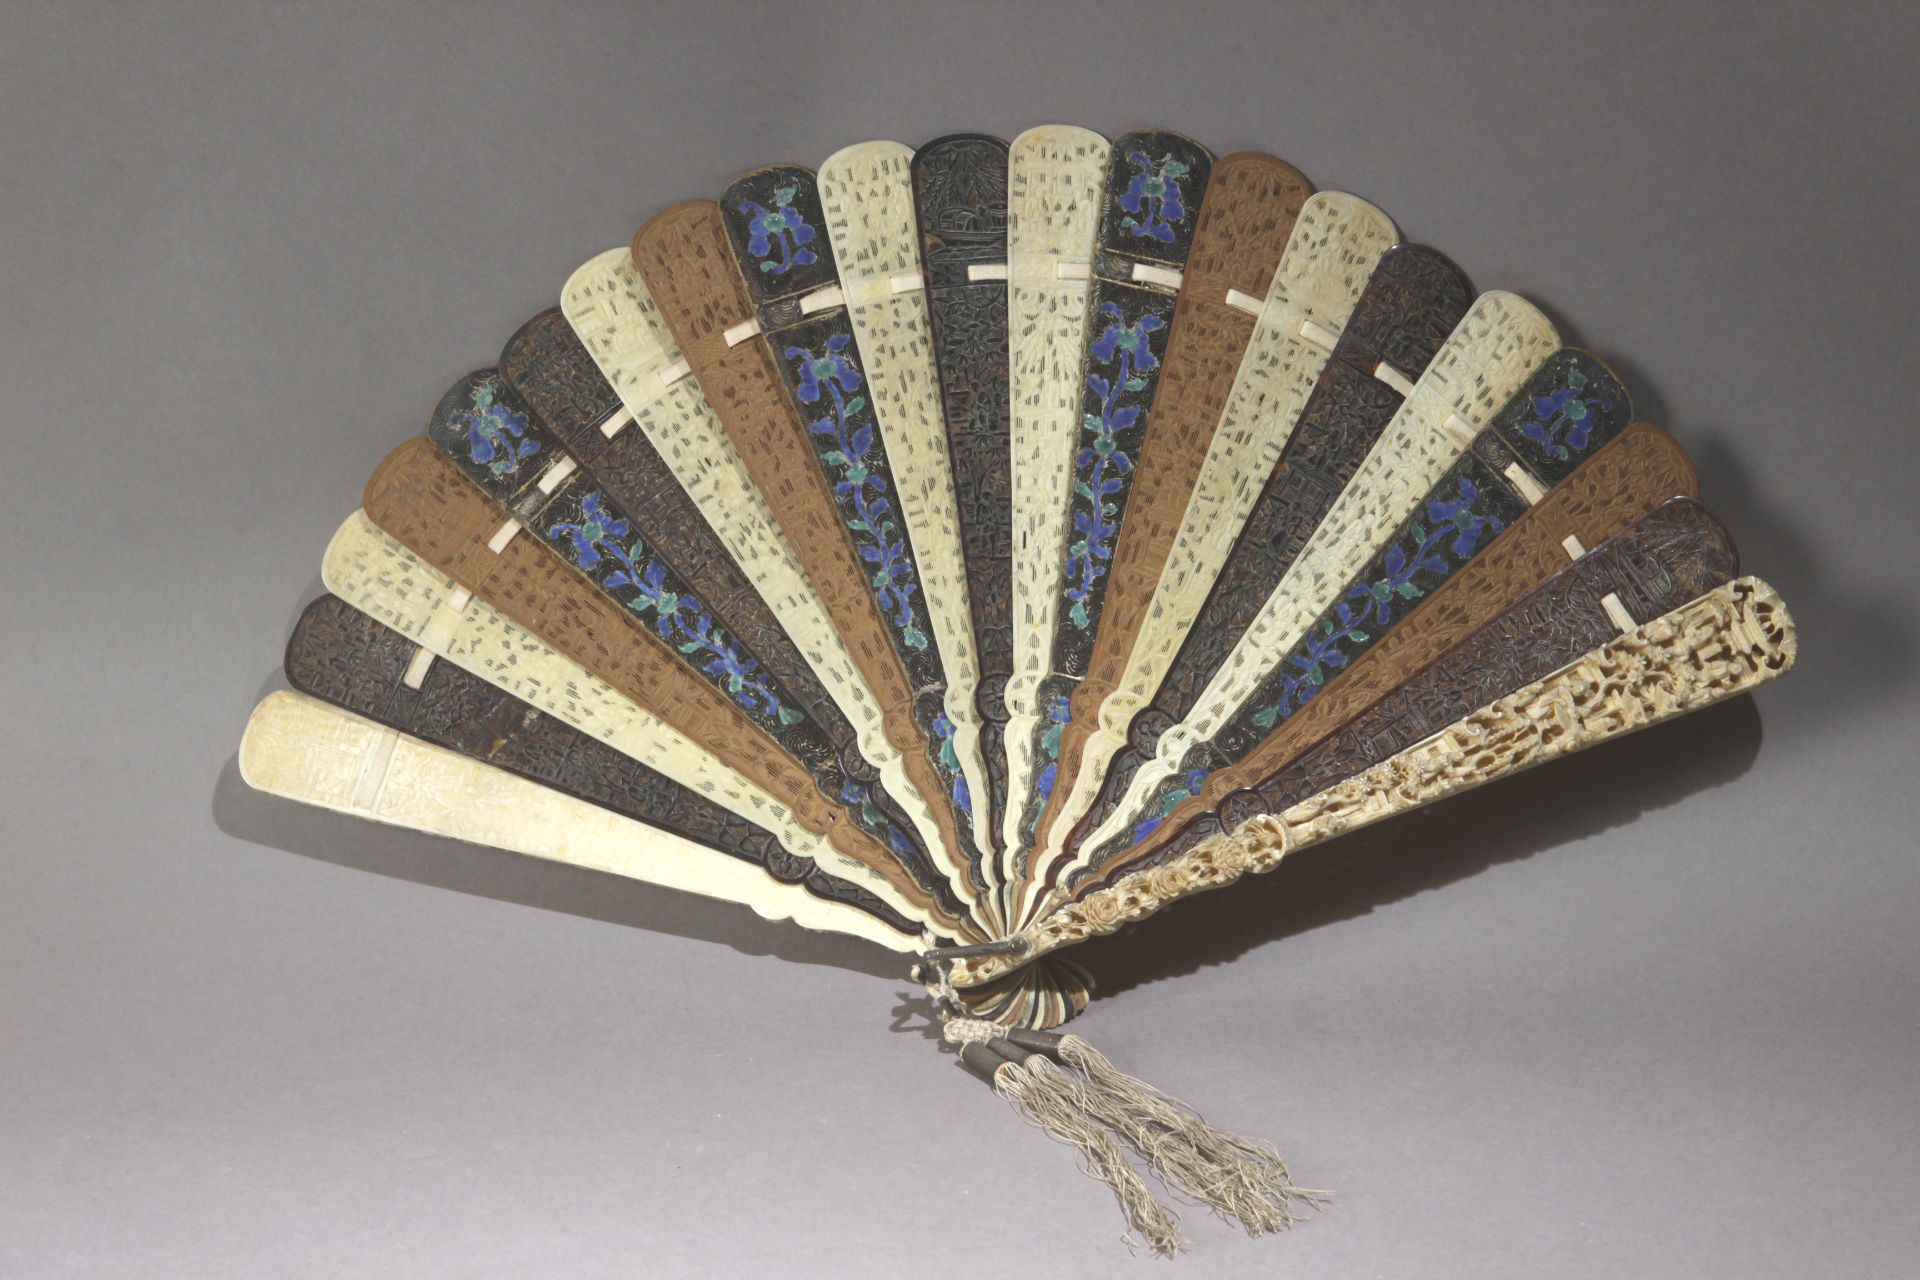 A late 19th century Chinese fan from Canton